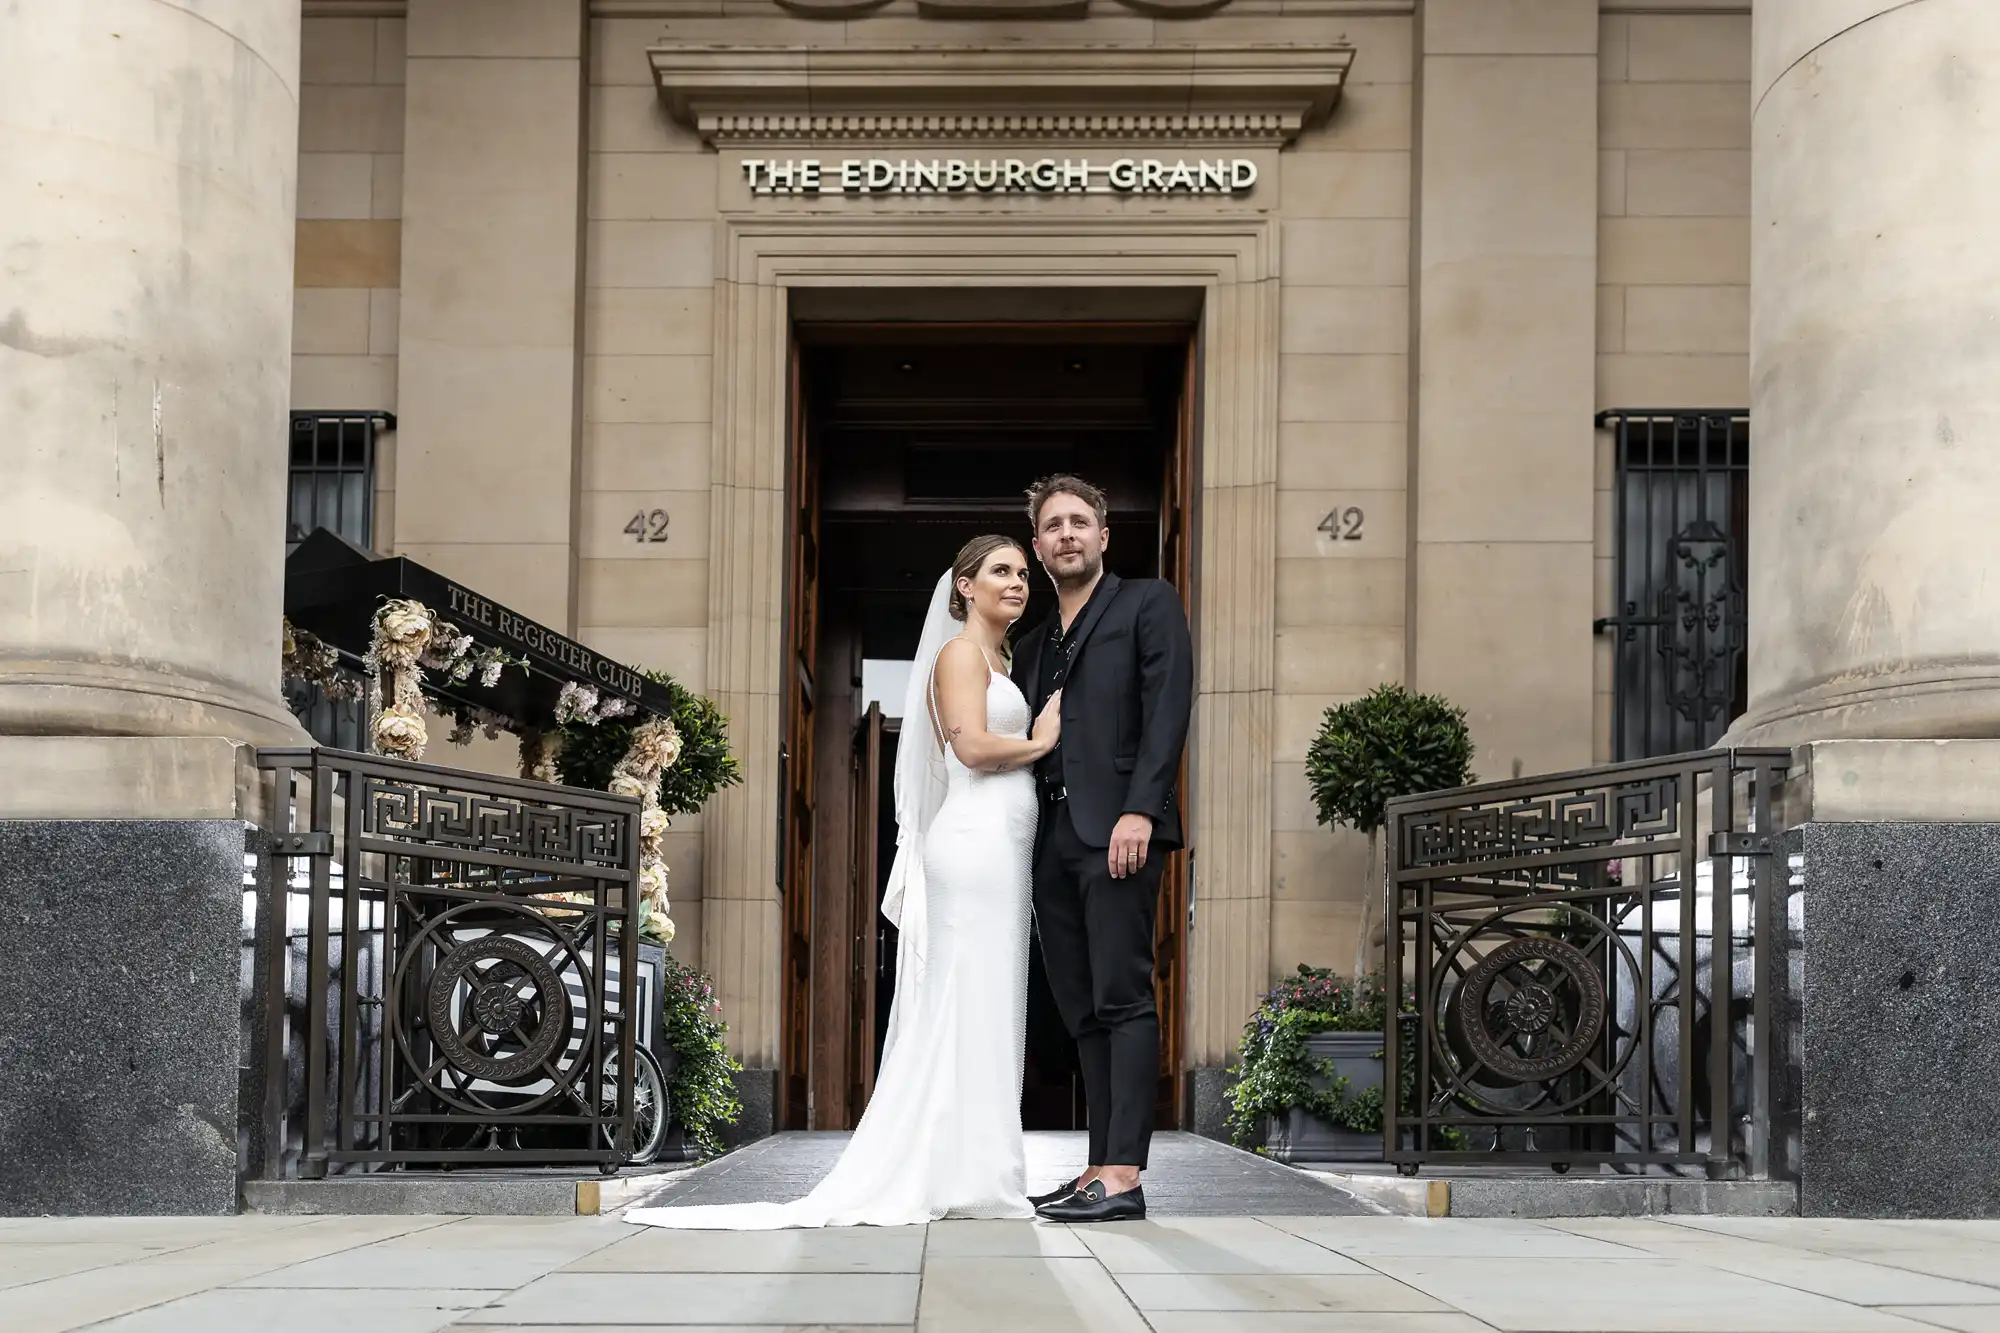 Cheval The Edinburgh Grand photos – the chic city wedding of Claire and Christopher